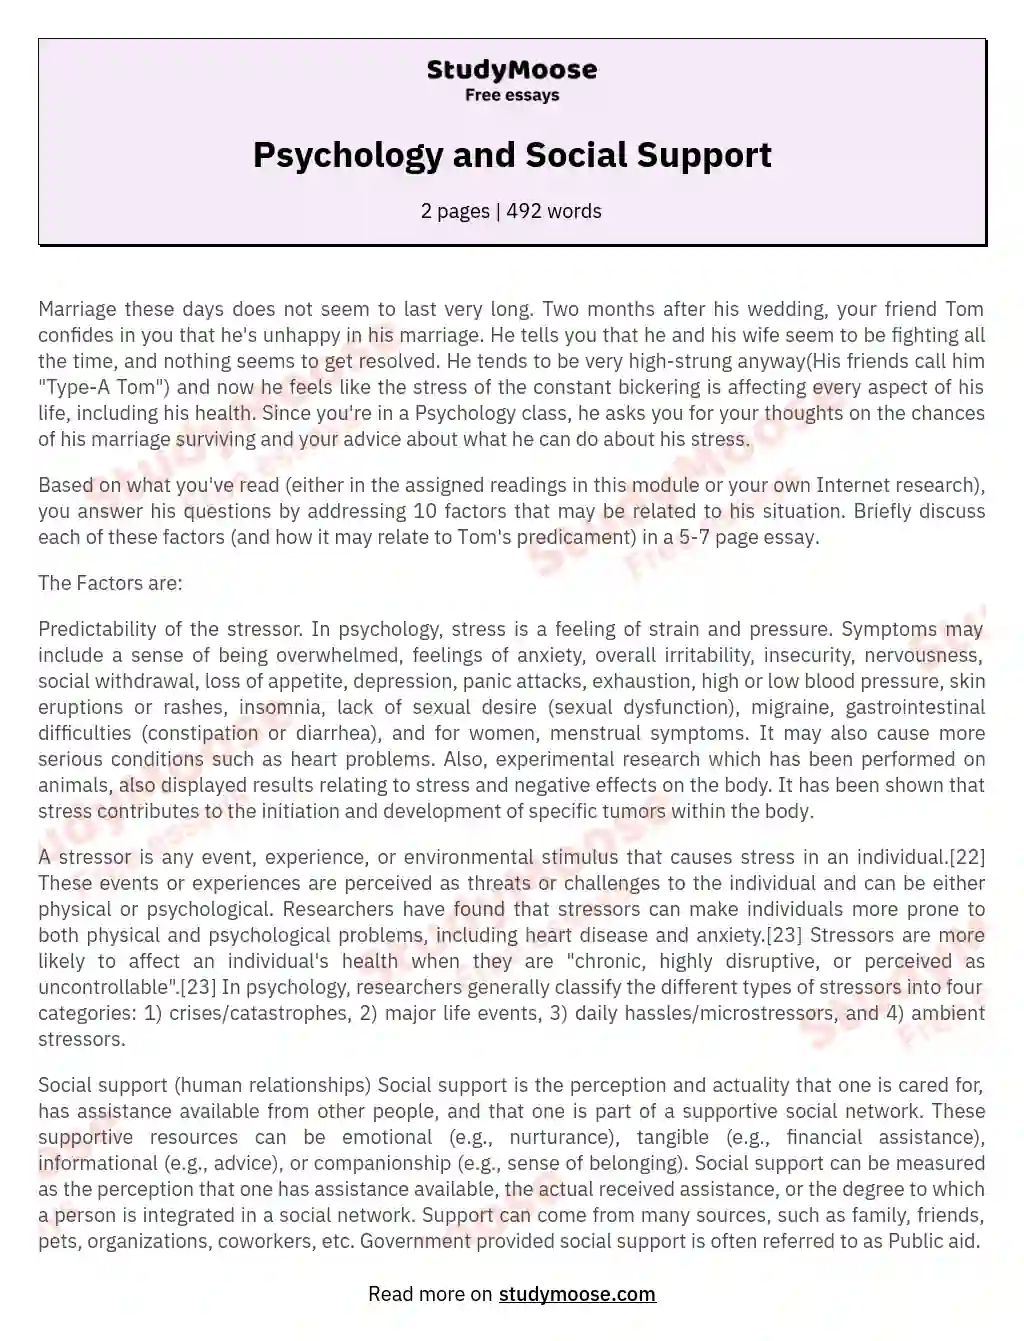 Psychology and Social Support essay